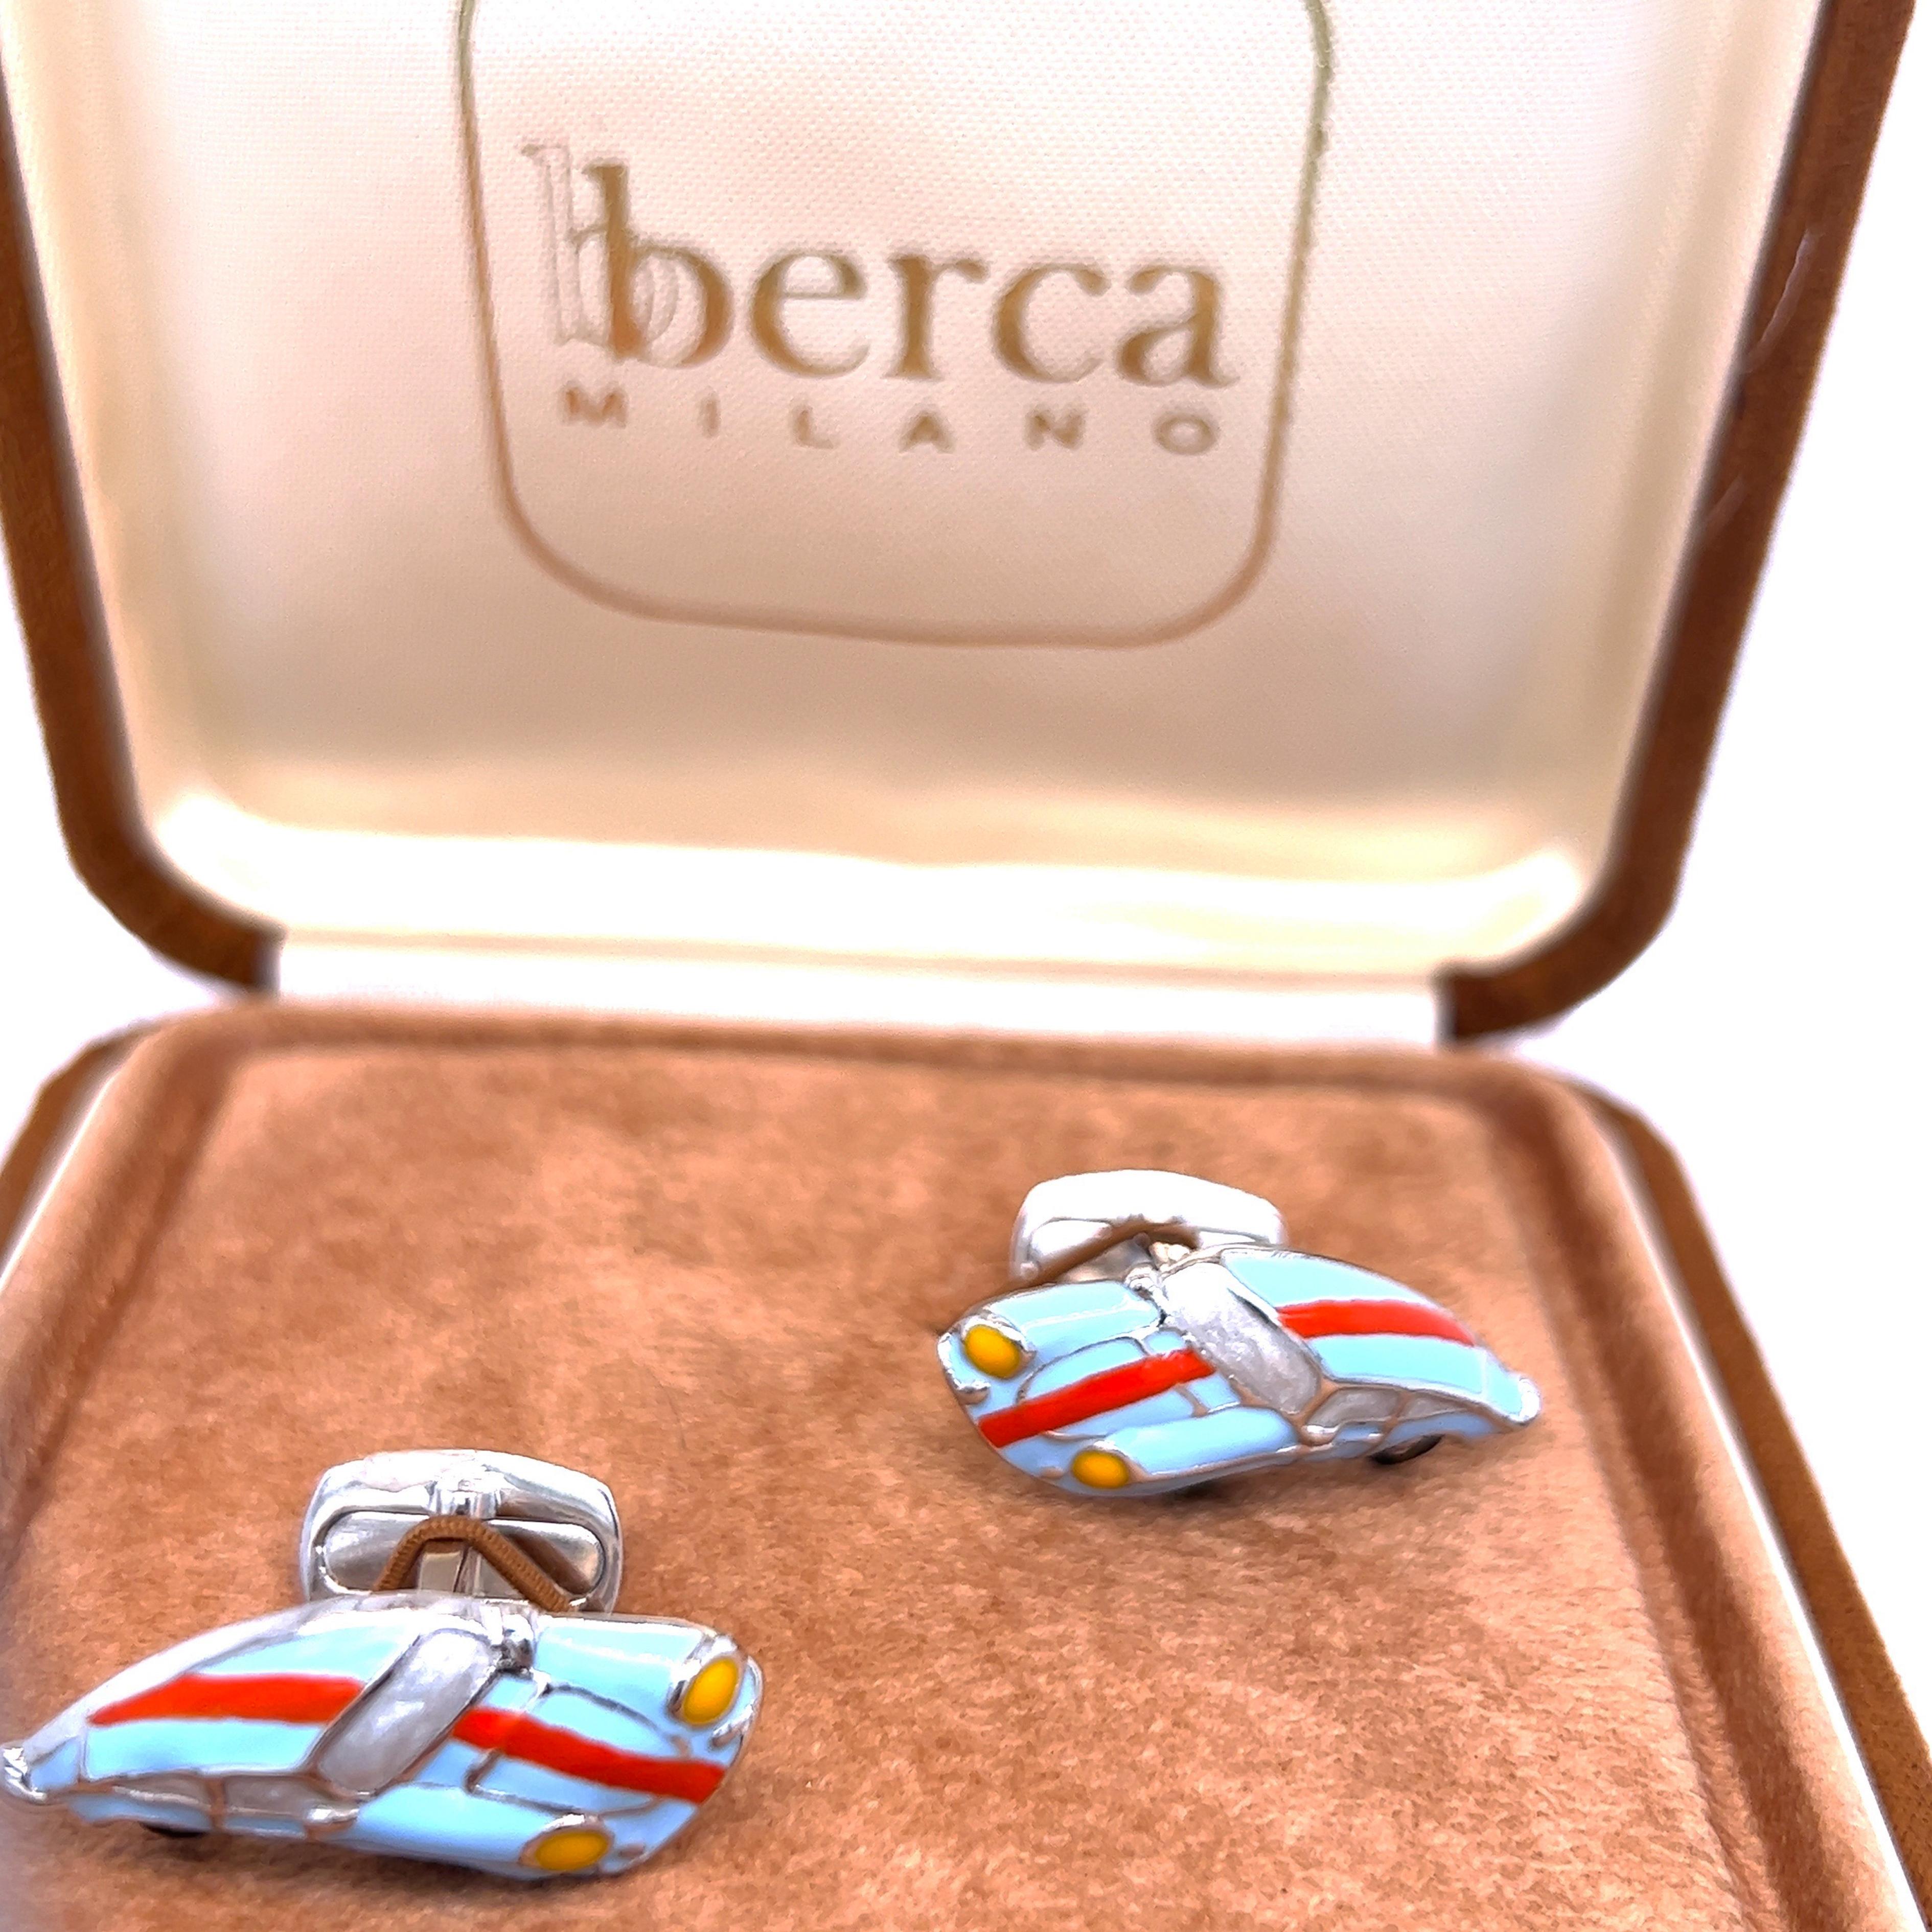 Berca Le Man Racing Color 911 Porsche Shaped Enameled Sterling Silver Cufflinks For Sale 1